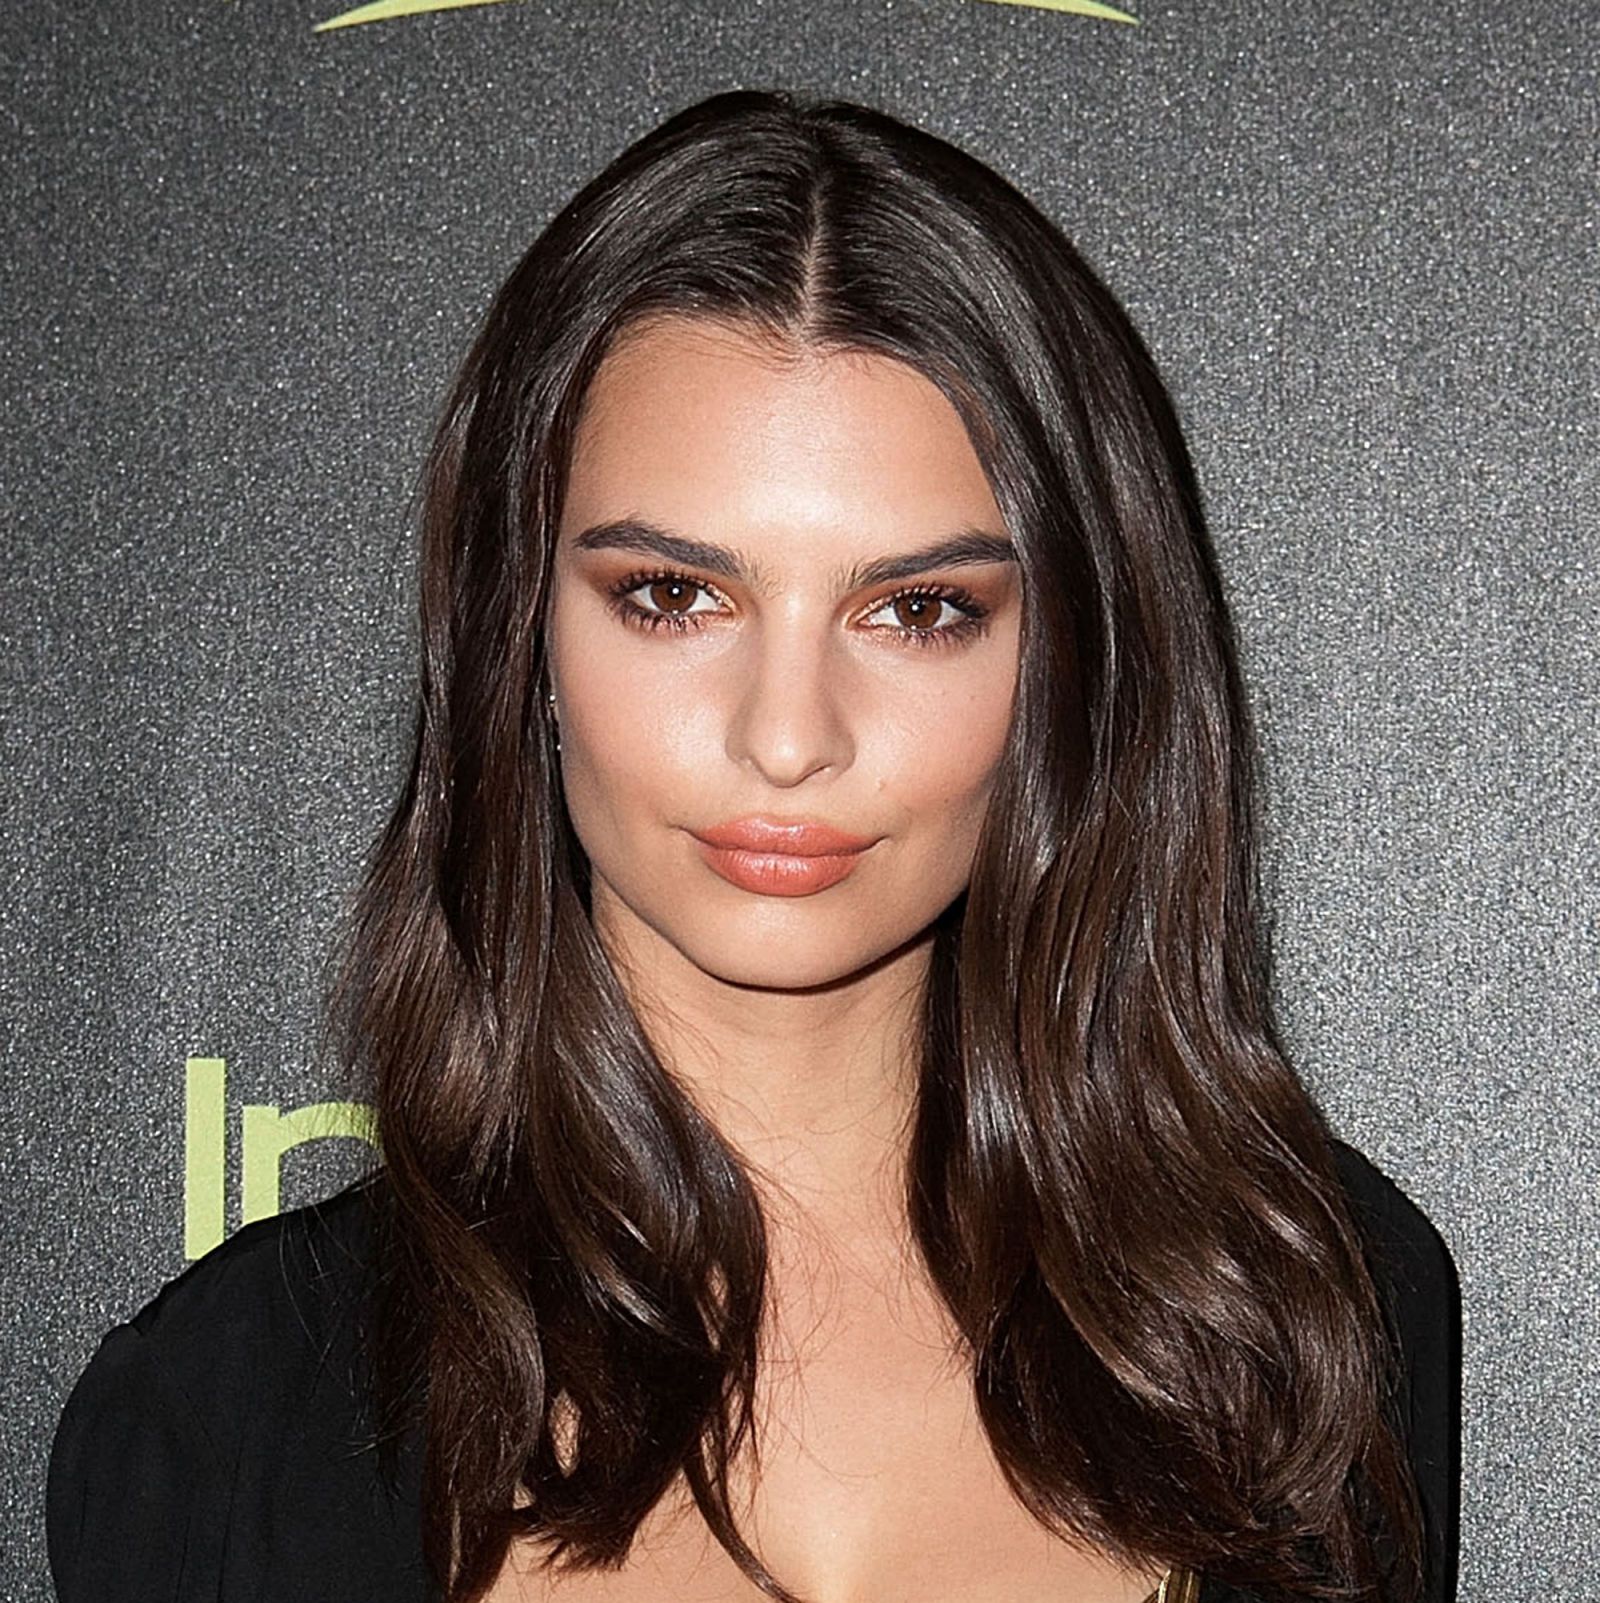 Emily Ratajkowski Brings the Heat in a Sheer Crop Top and Matching Low-Rise Skirt